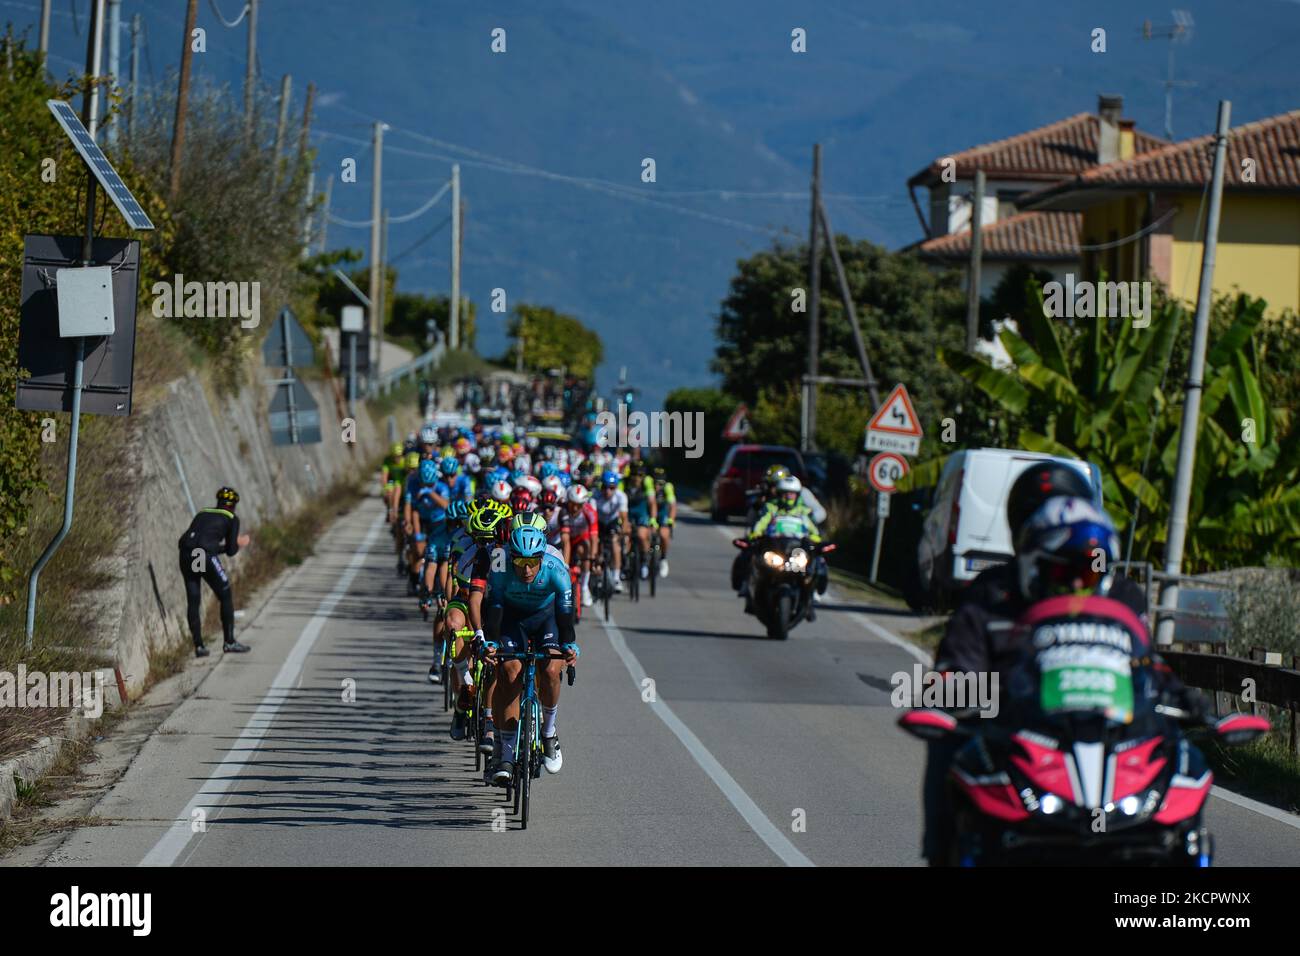 Davide Martinelli of Italy and Astana - Premier Tech leads the peloton passing by Refrontolo during the first edition of the Veneto Classic, the 207km pro cycling race from Venezia to Bassano del Grappa, held in the Veneto region. On Sunday, October 17, 2021, in Bassano del Grappa, Veneto, Italy. (Photo by Artur Widak/NurPhoto) Stock Photo